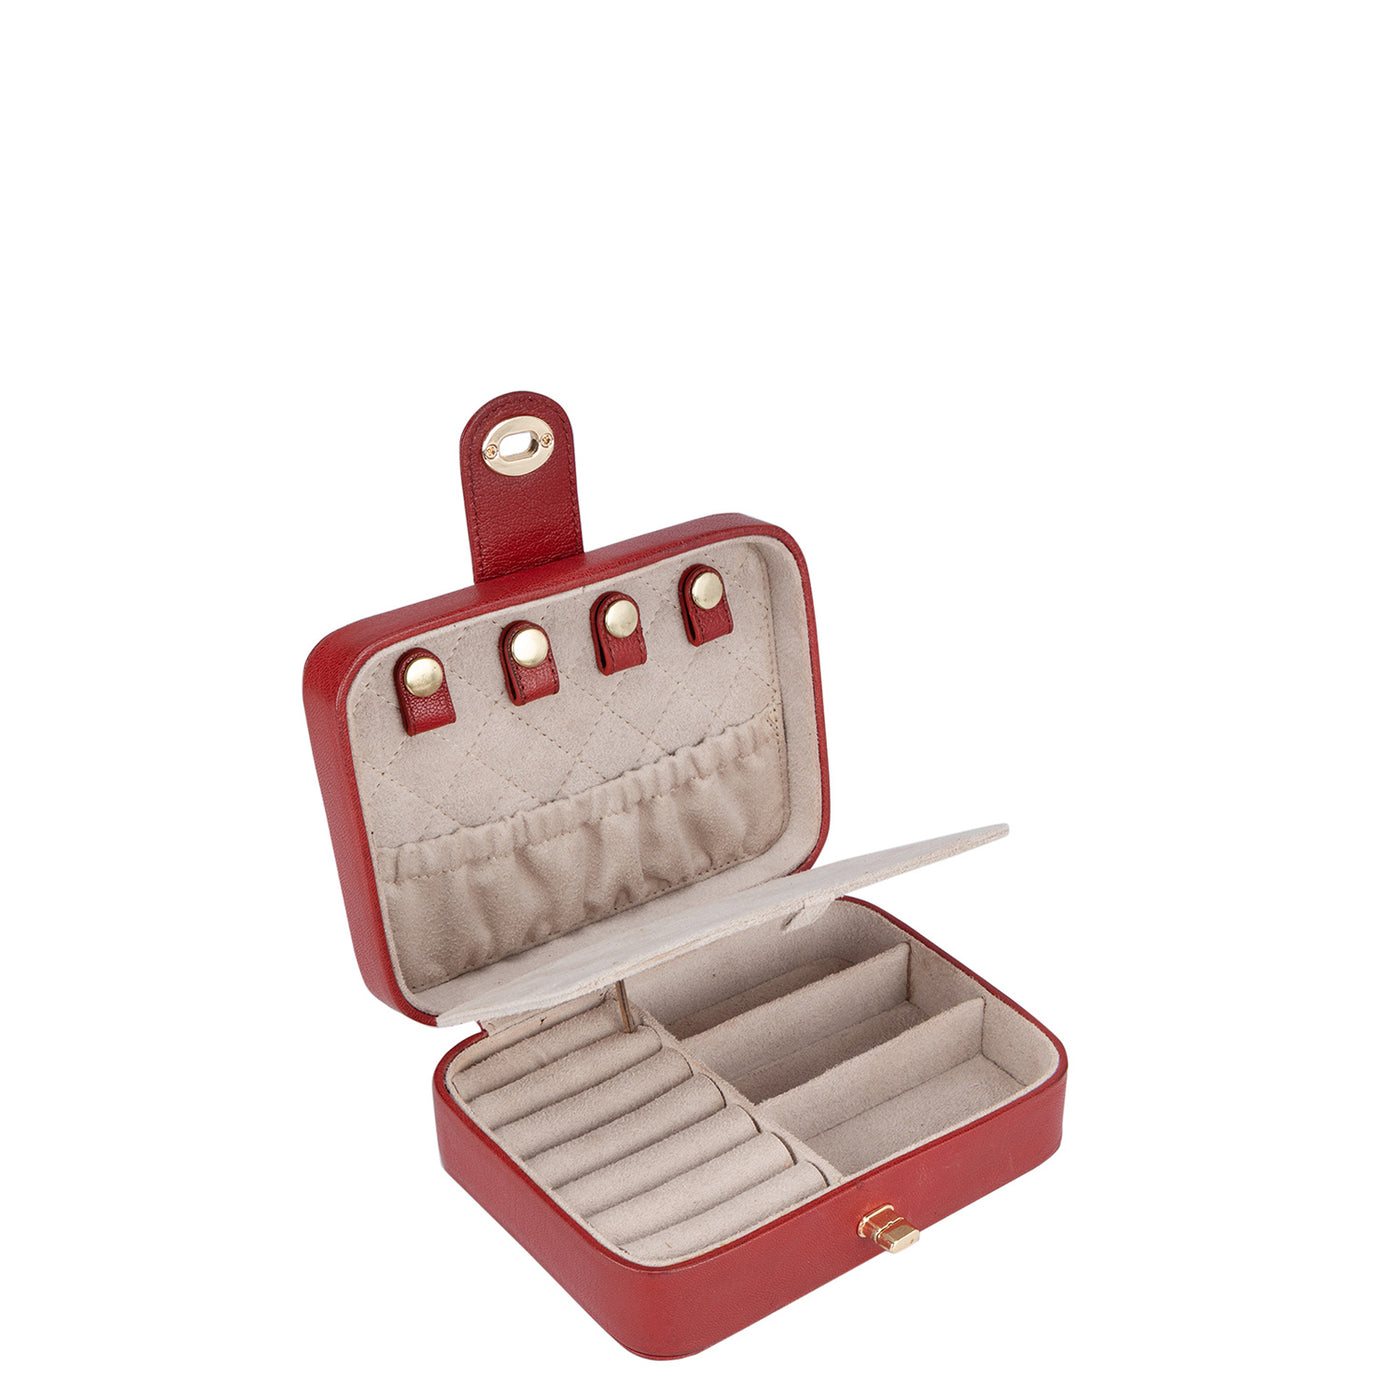 Wax Leather Jewellery Case - Red